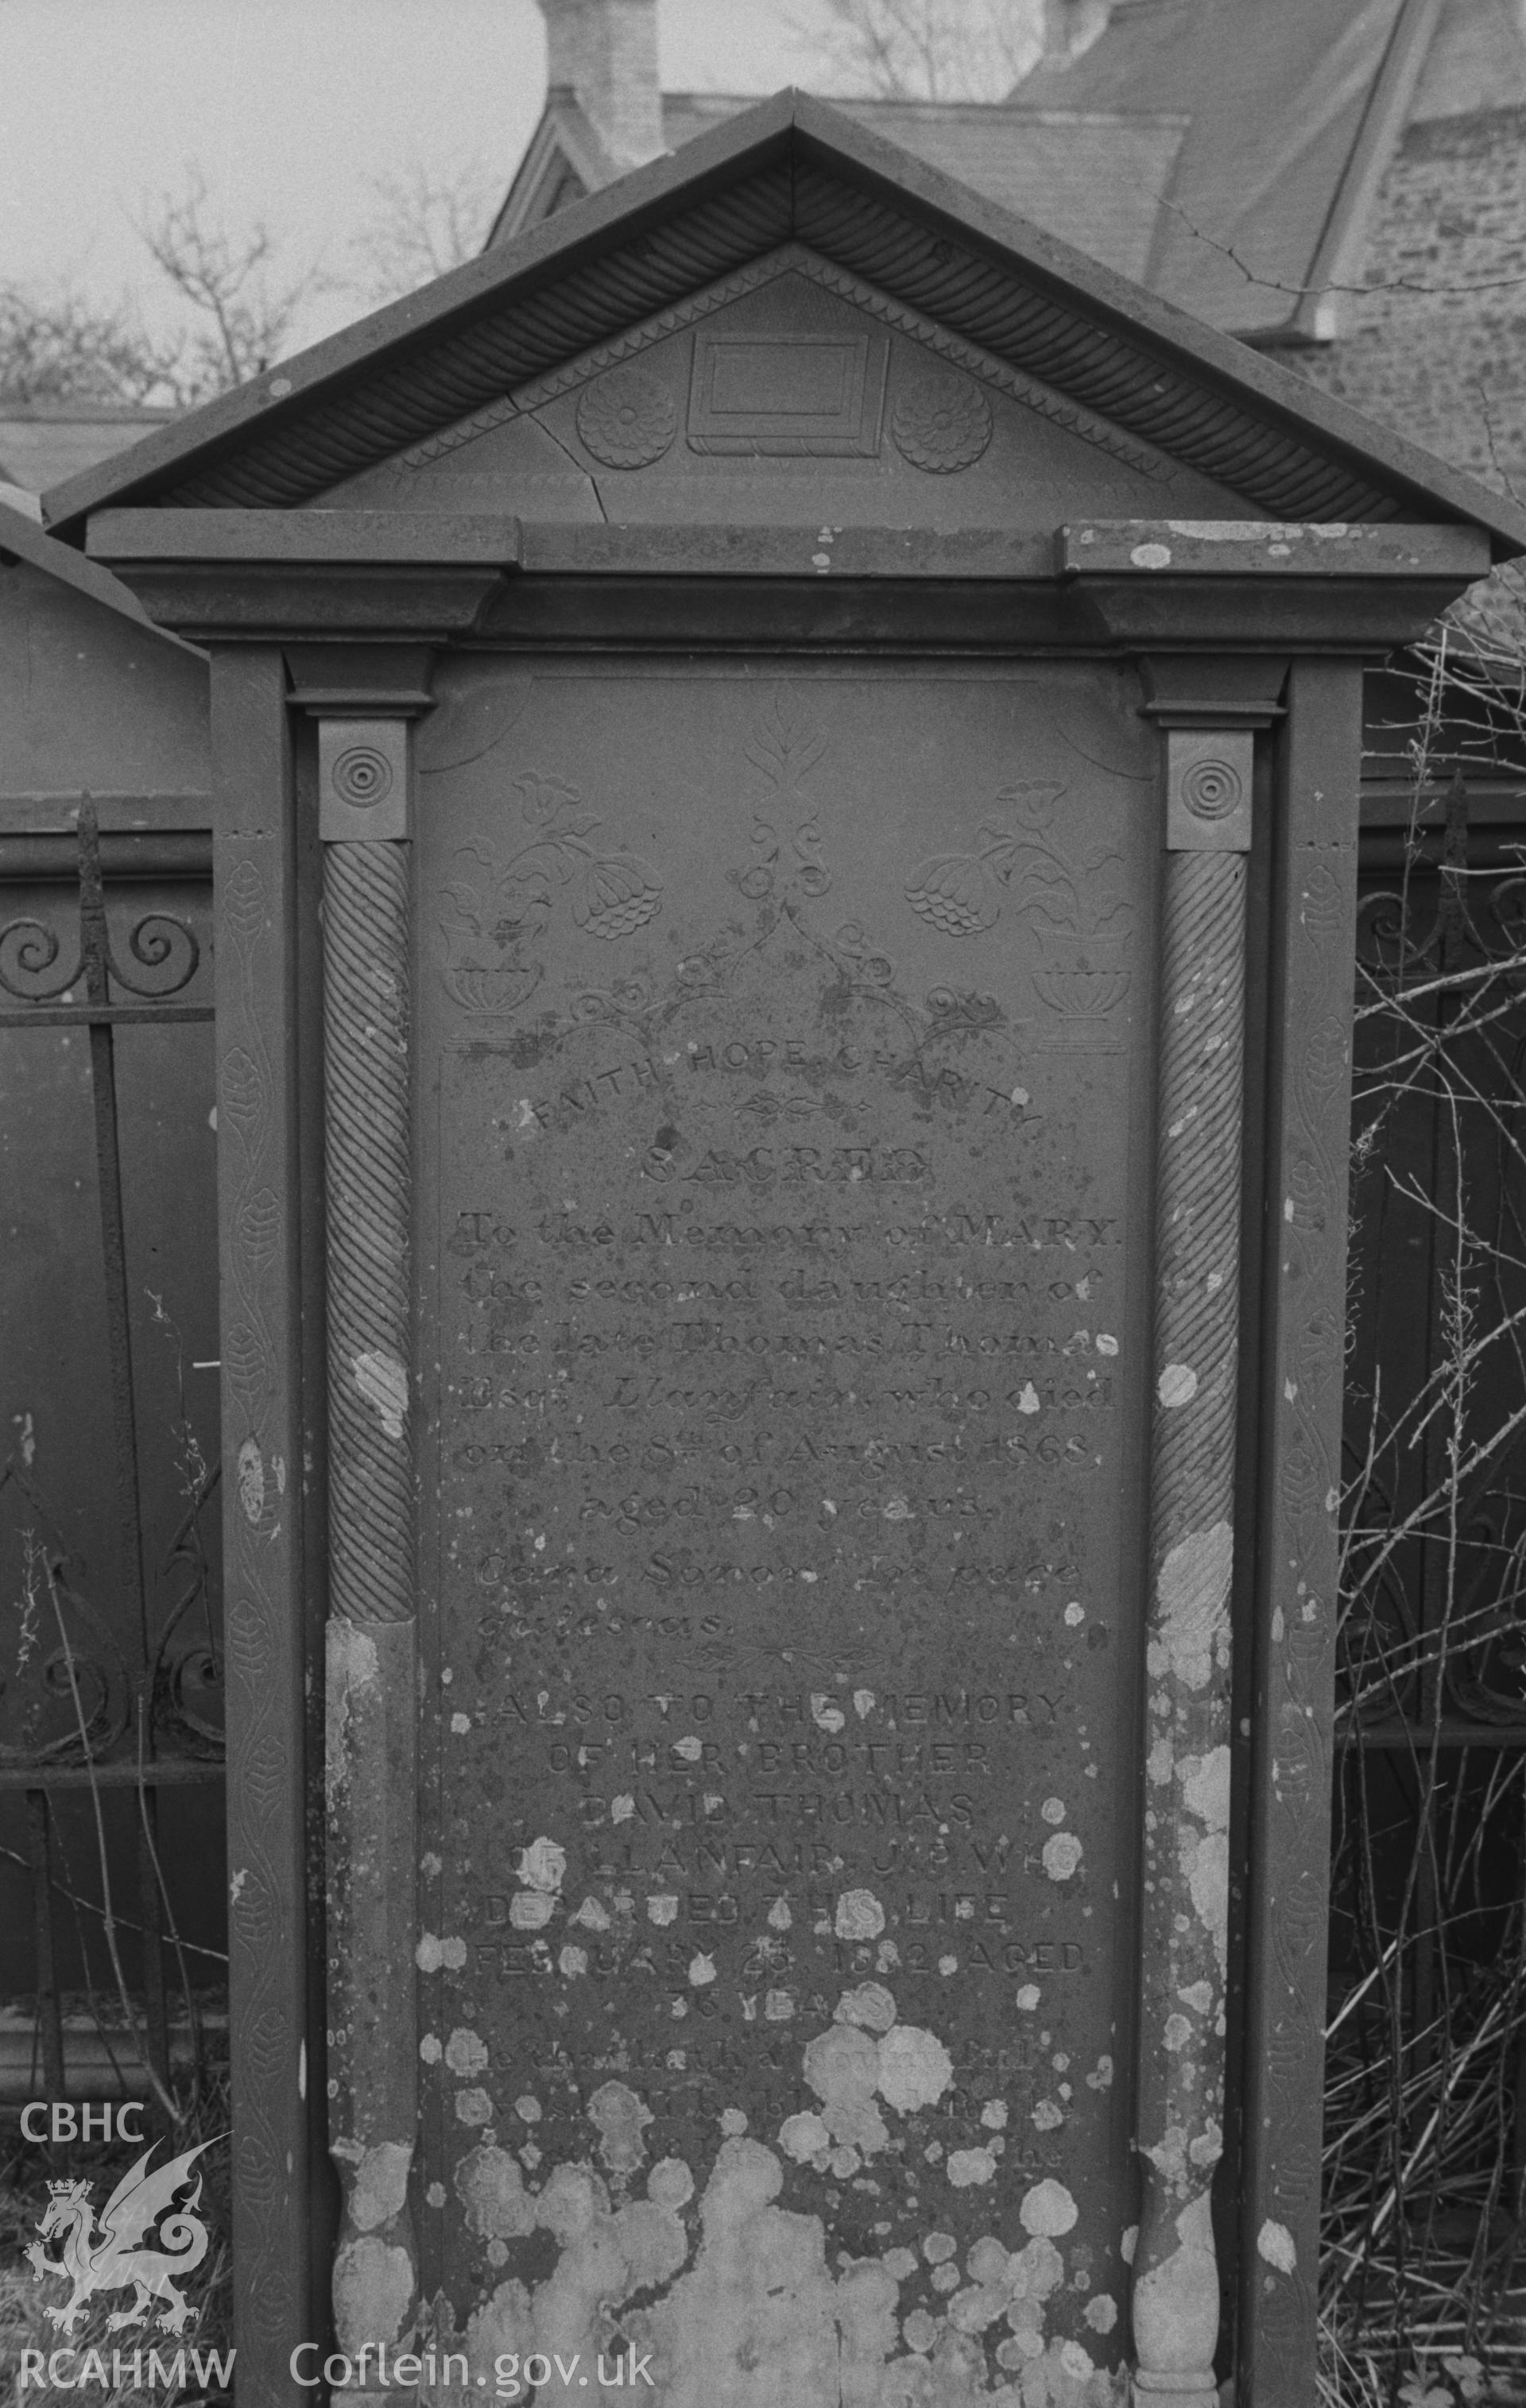 Digital copy of black & white negative showing gravestone in memory of members of the Thomas family of Llanfair at Capel Pant-y-Defaid, Prengwyn, Llandysul. Inside very fine wrought iron grave enclosures. Photographed by Arthur O. Chater on 11 April 1967.